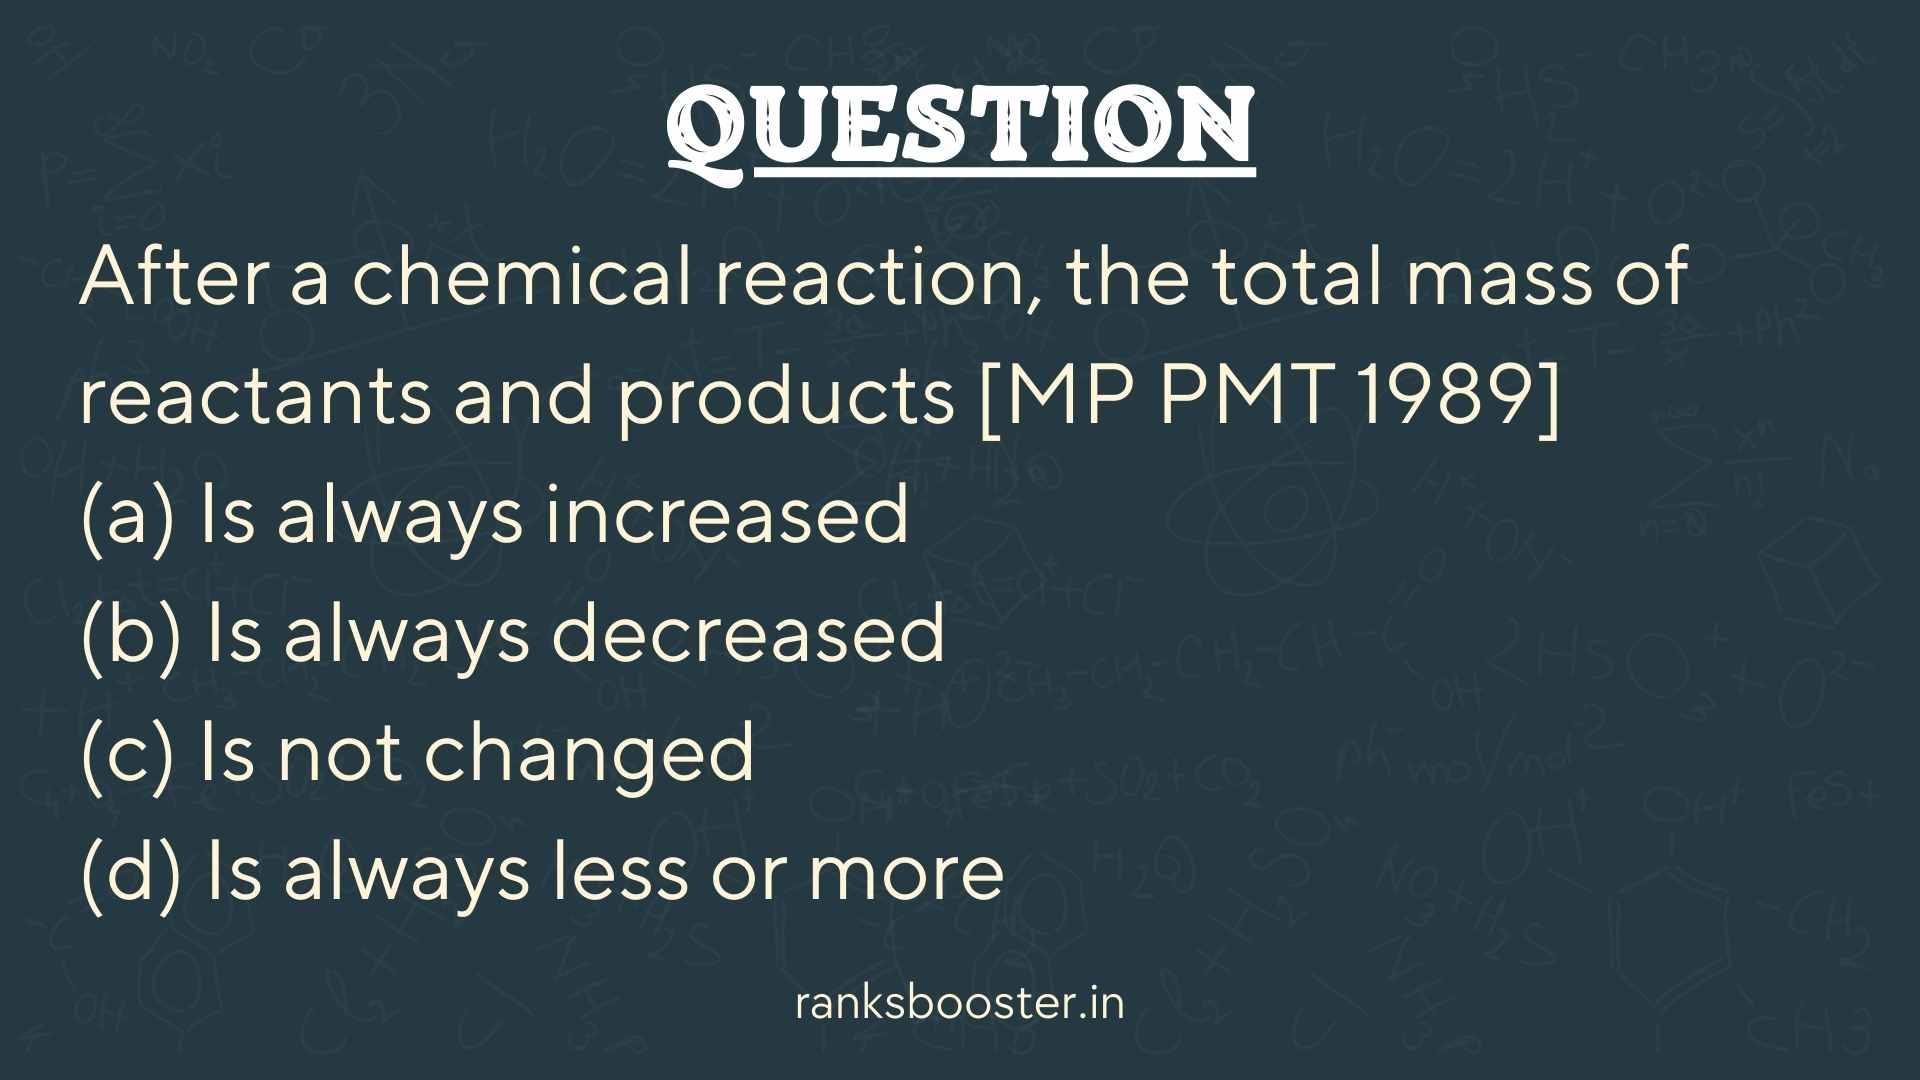 Question: After a chemical reaction, the total mass of reactants and products [MP PMT 1989] (a) Is always increased (b) Is always decreased (c) Is not changed (d) Is always less or more